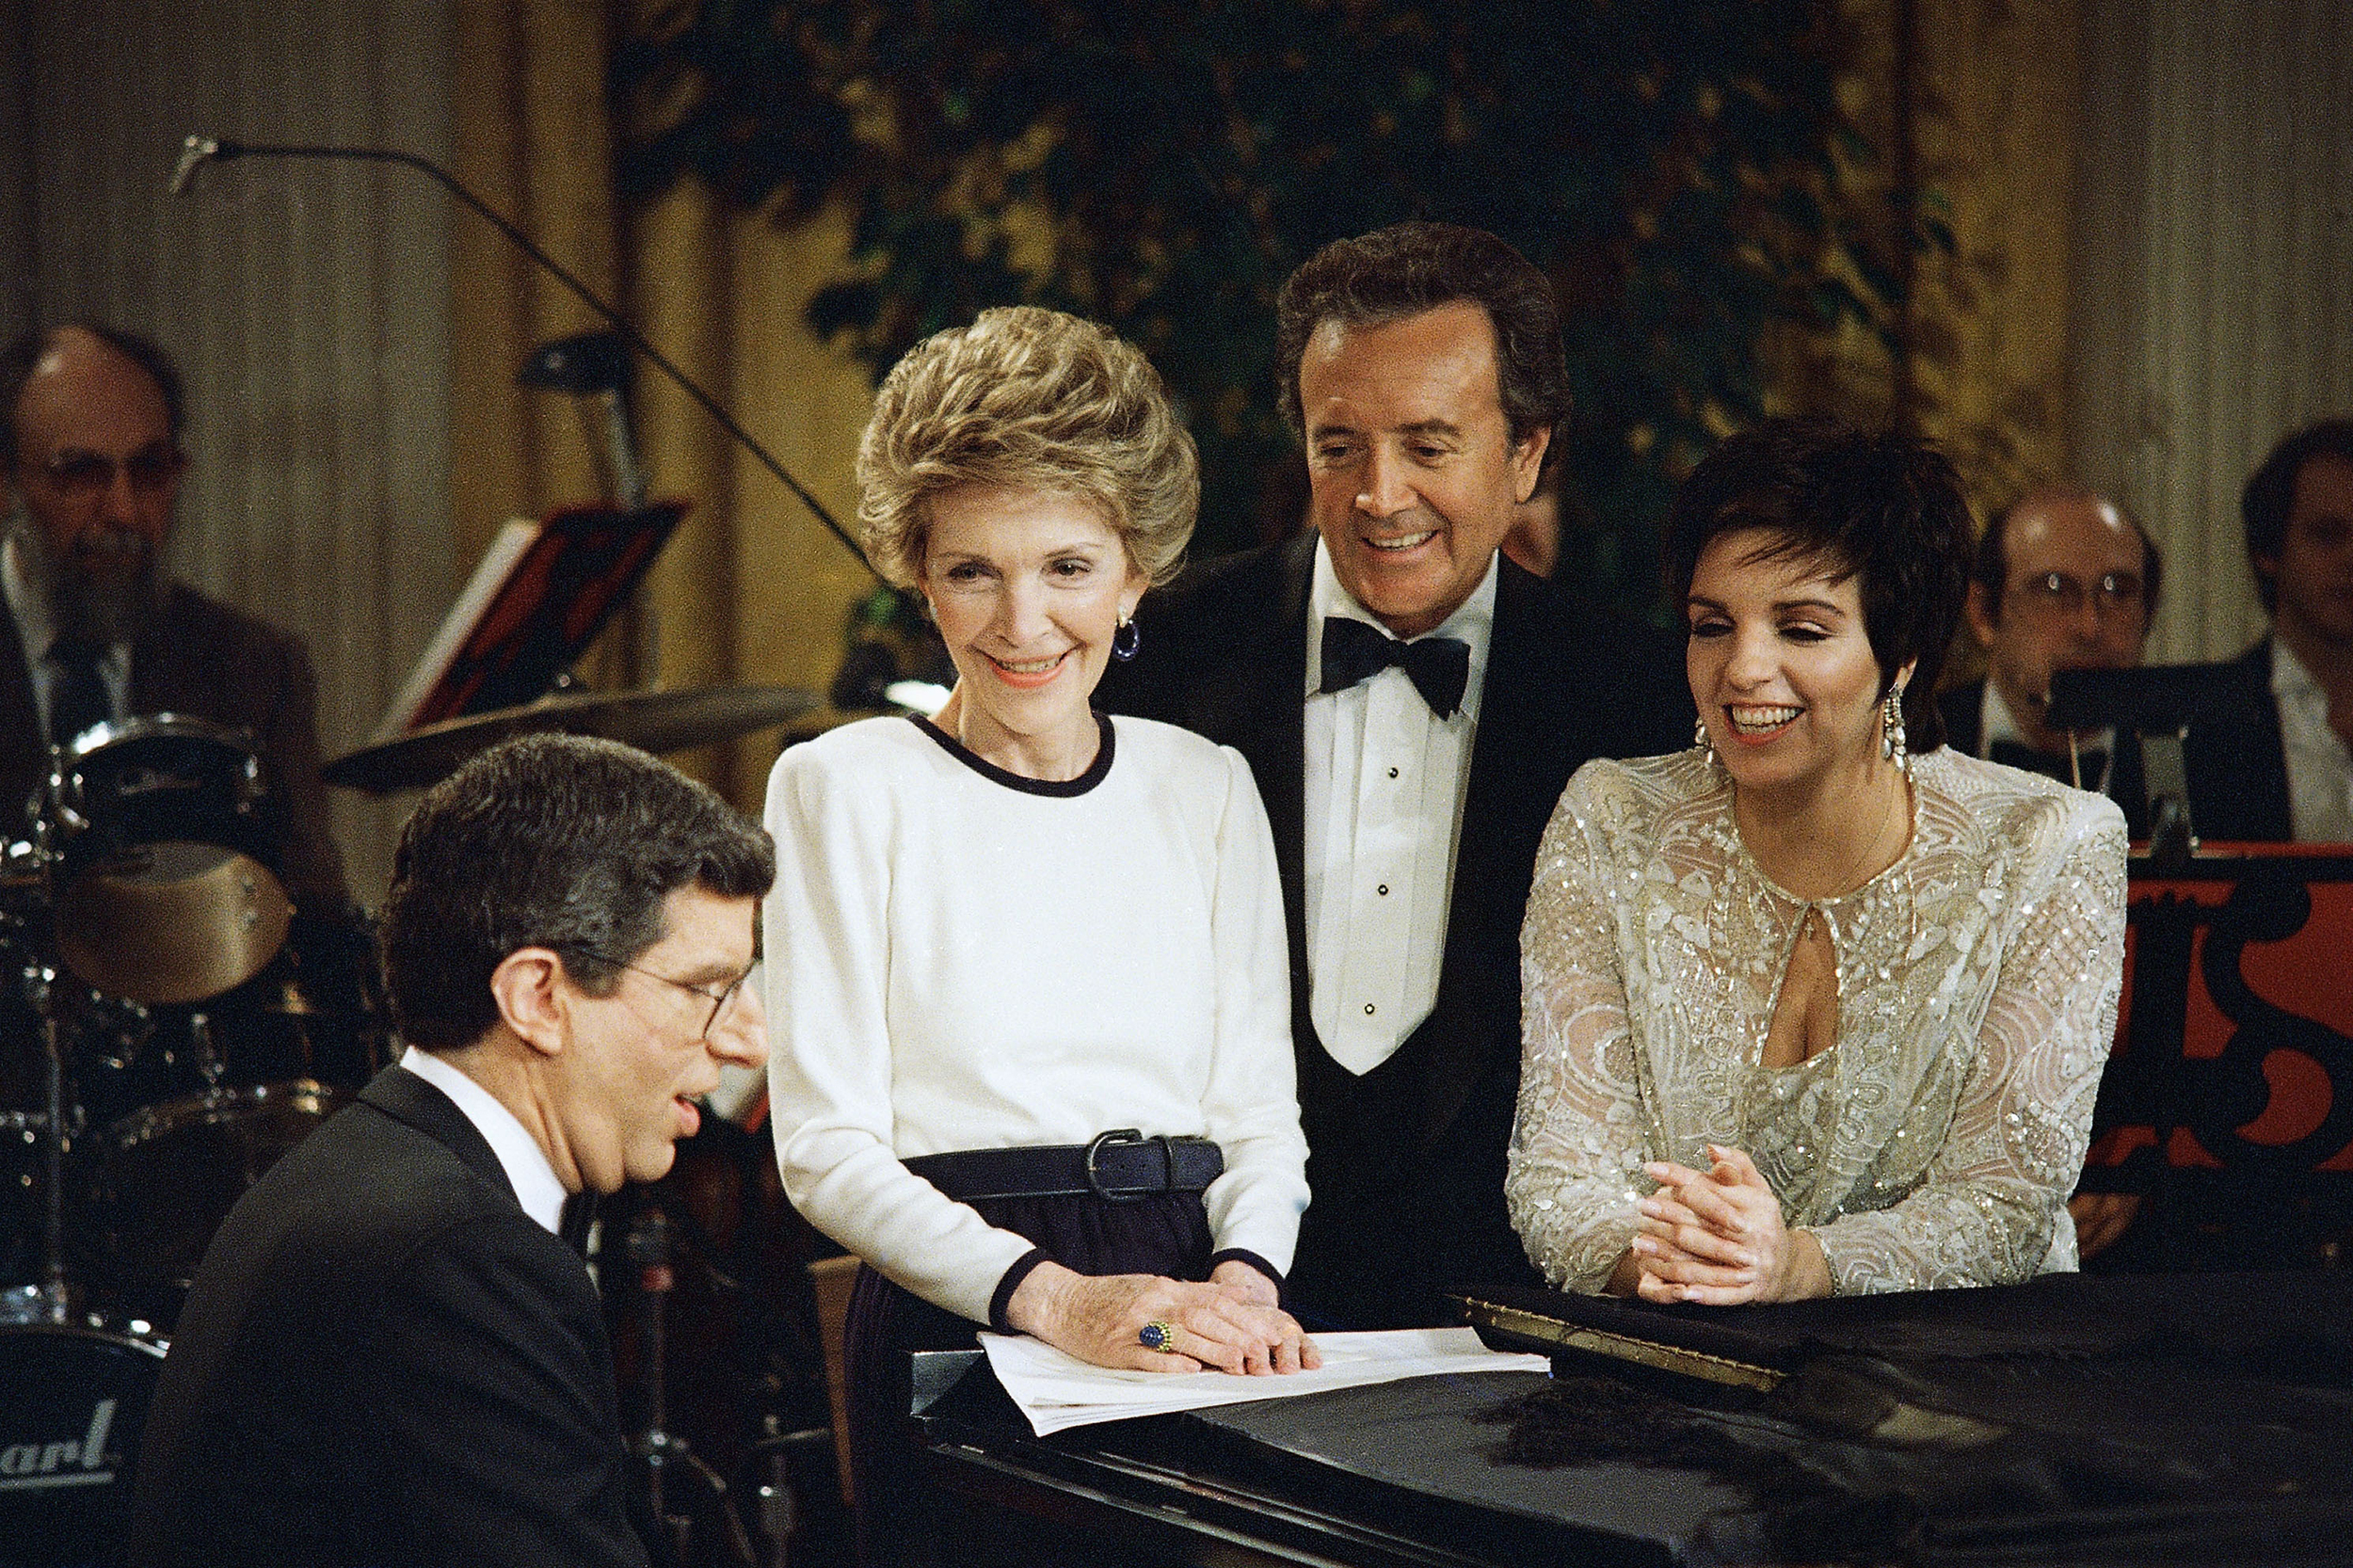 Nancy Reagan sings a song along with Marvin Hamlisch, Vic Damone and Liza Minnelli during a rehearsal at the White House in Washington, D.C. on March 8, 1987.